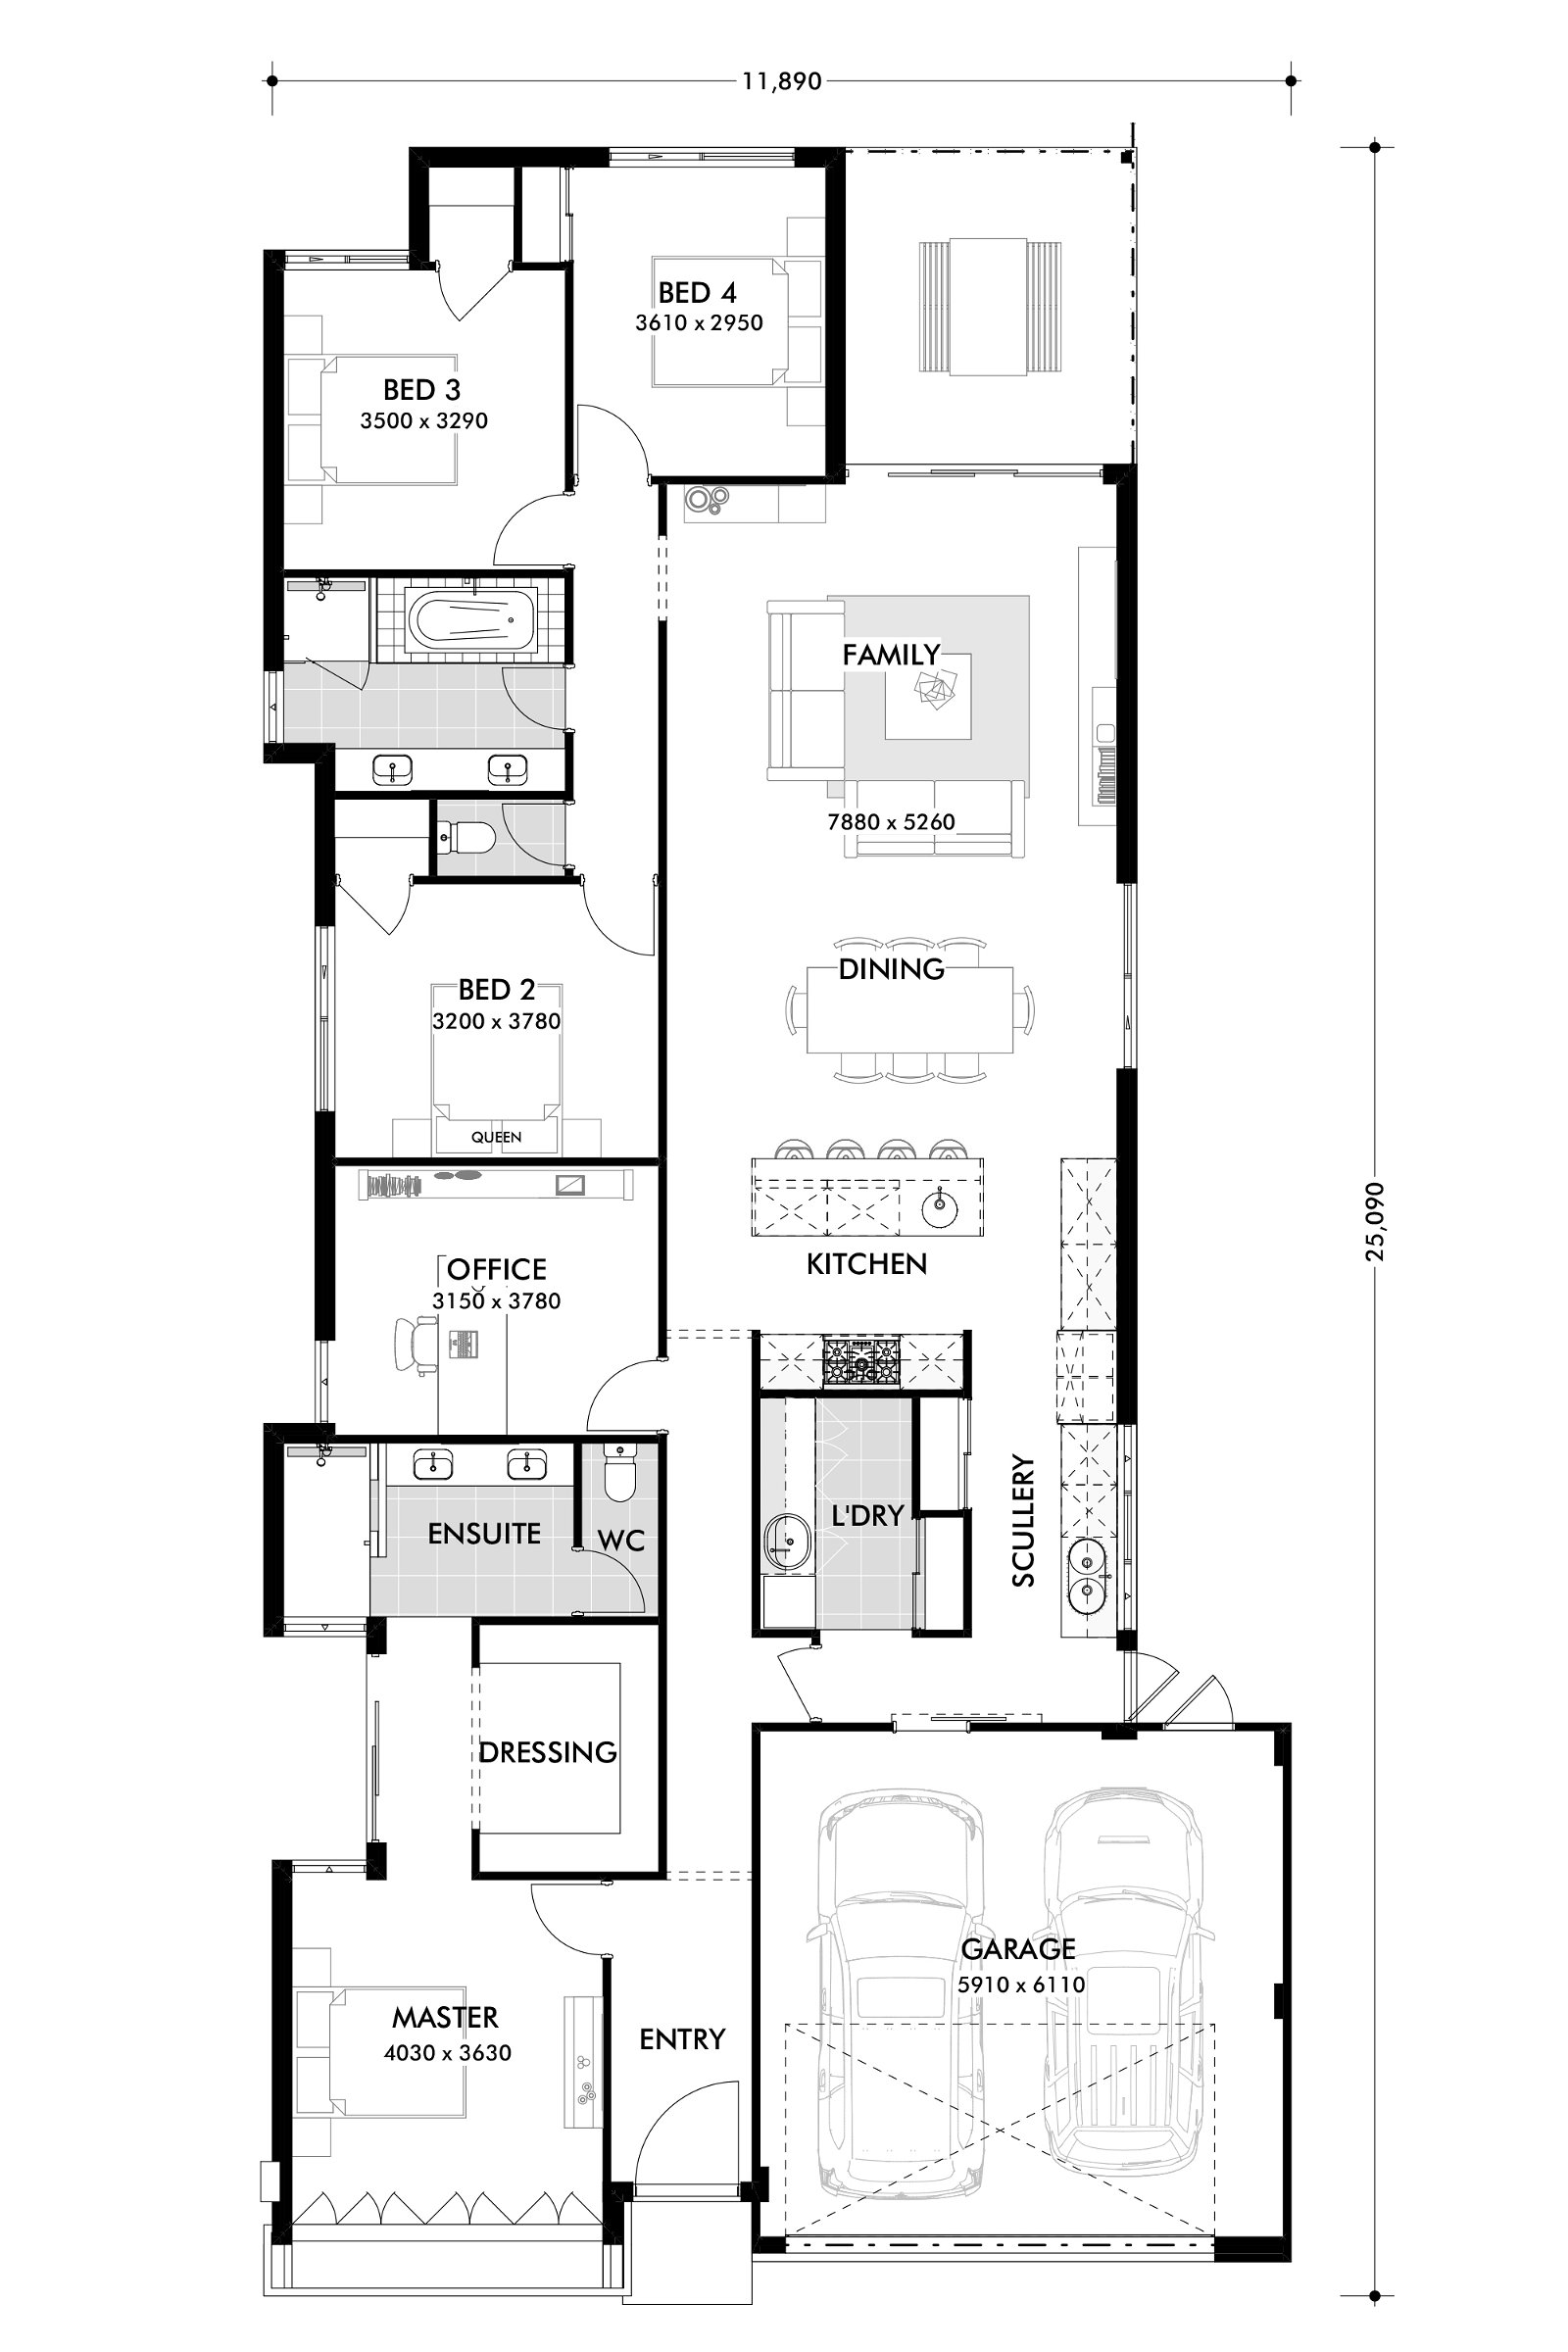 Residential Attitudes - Punk And The Plums - Floorplan - Punk And The Plums Floorplan Website